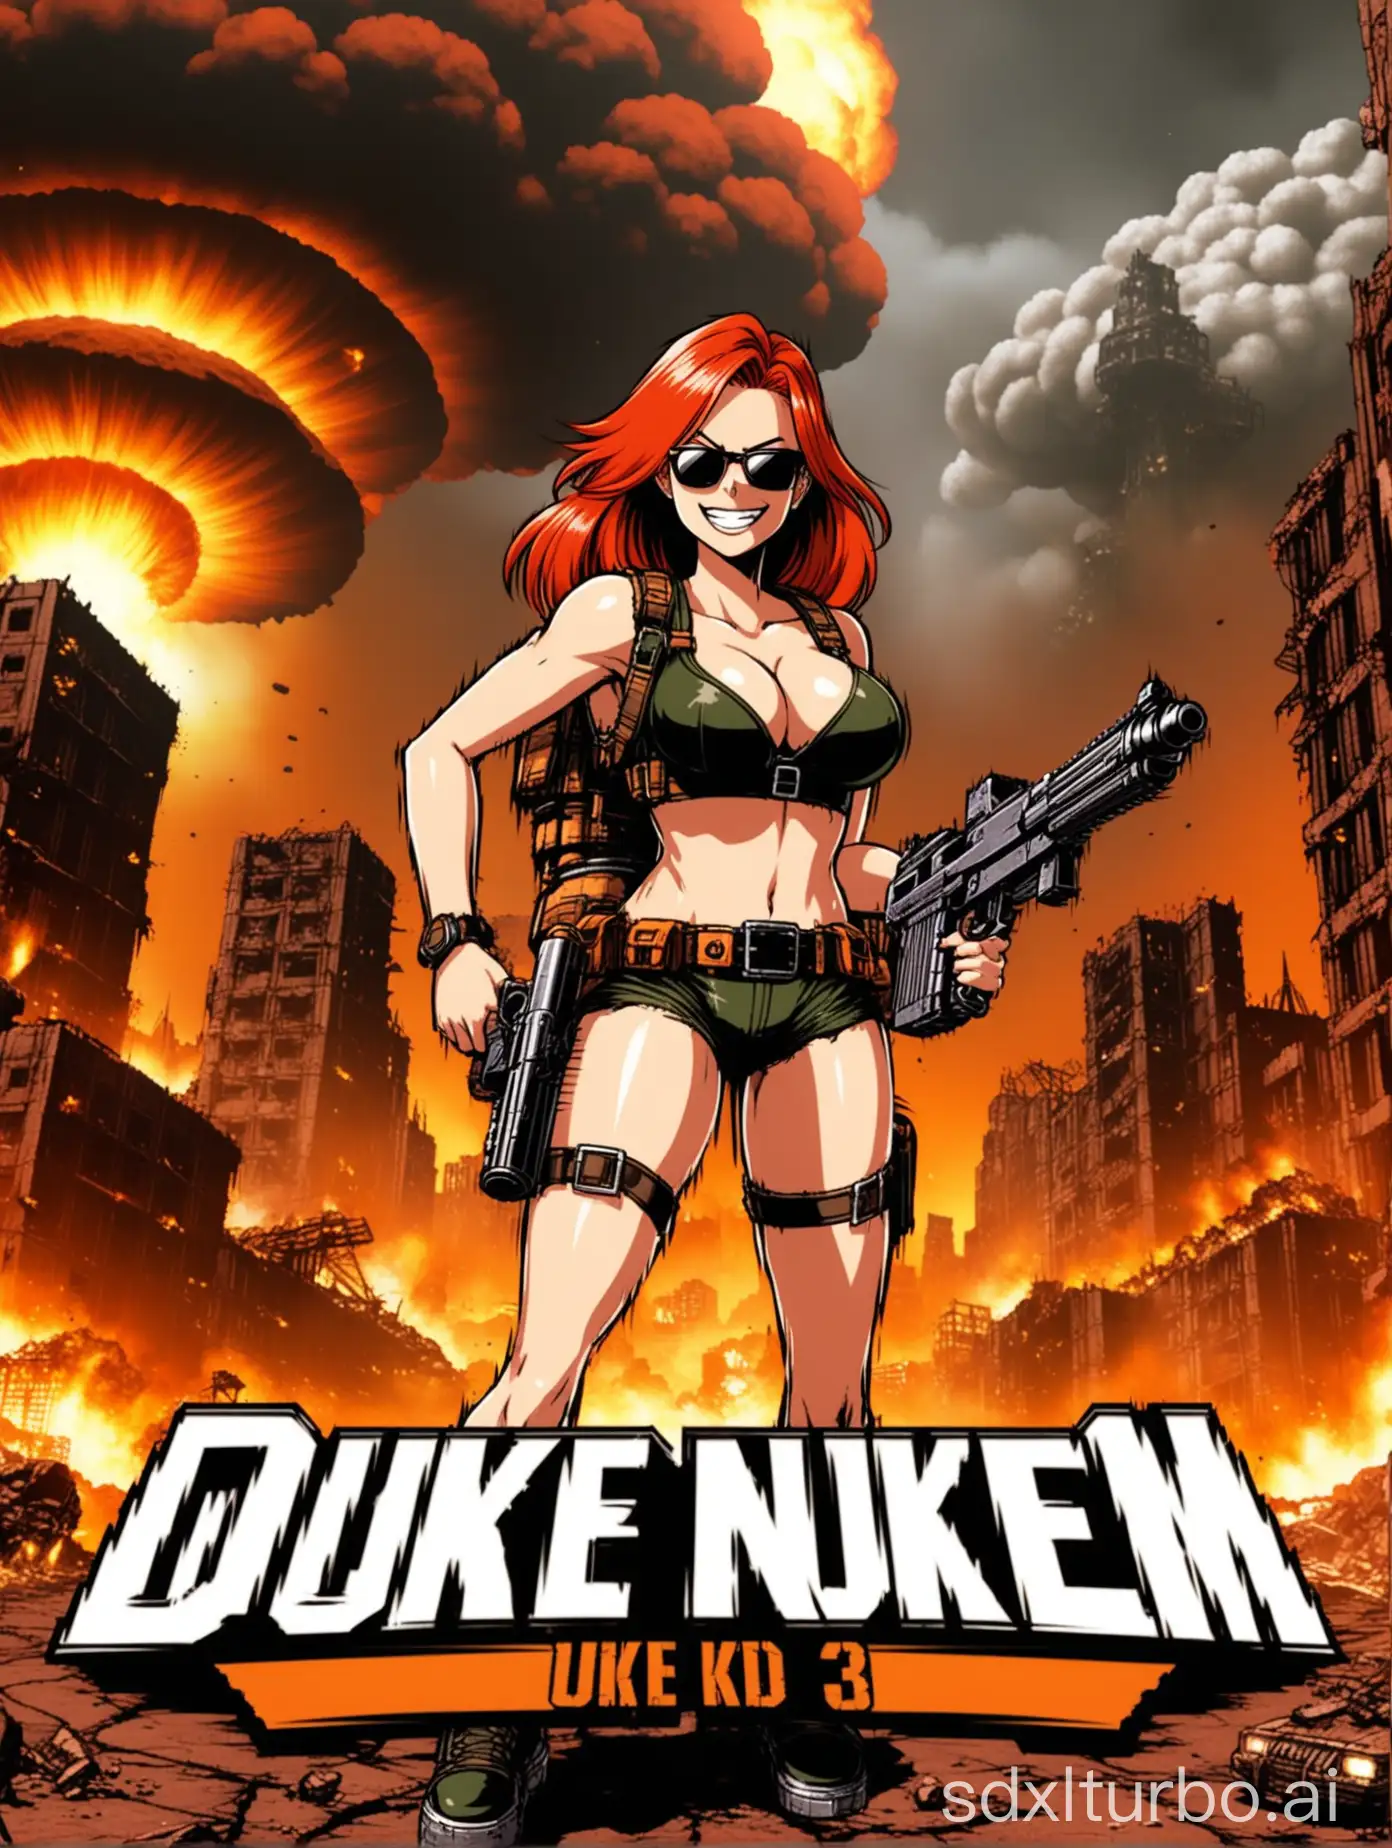 redhead anime girl with machine pistols, in duke nukem 3d title screen, mushroom cloud in the background, destroyed city setting, sunglasses, grinning